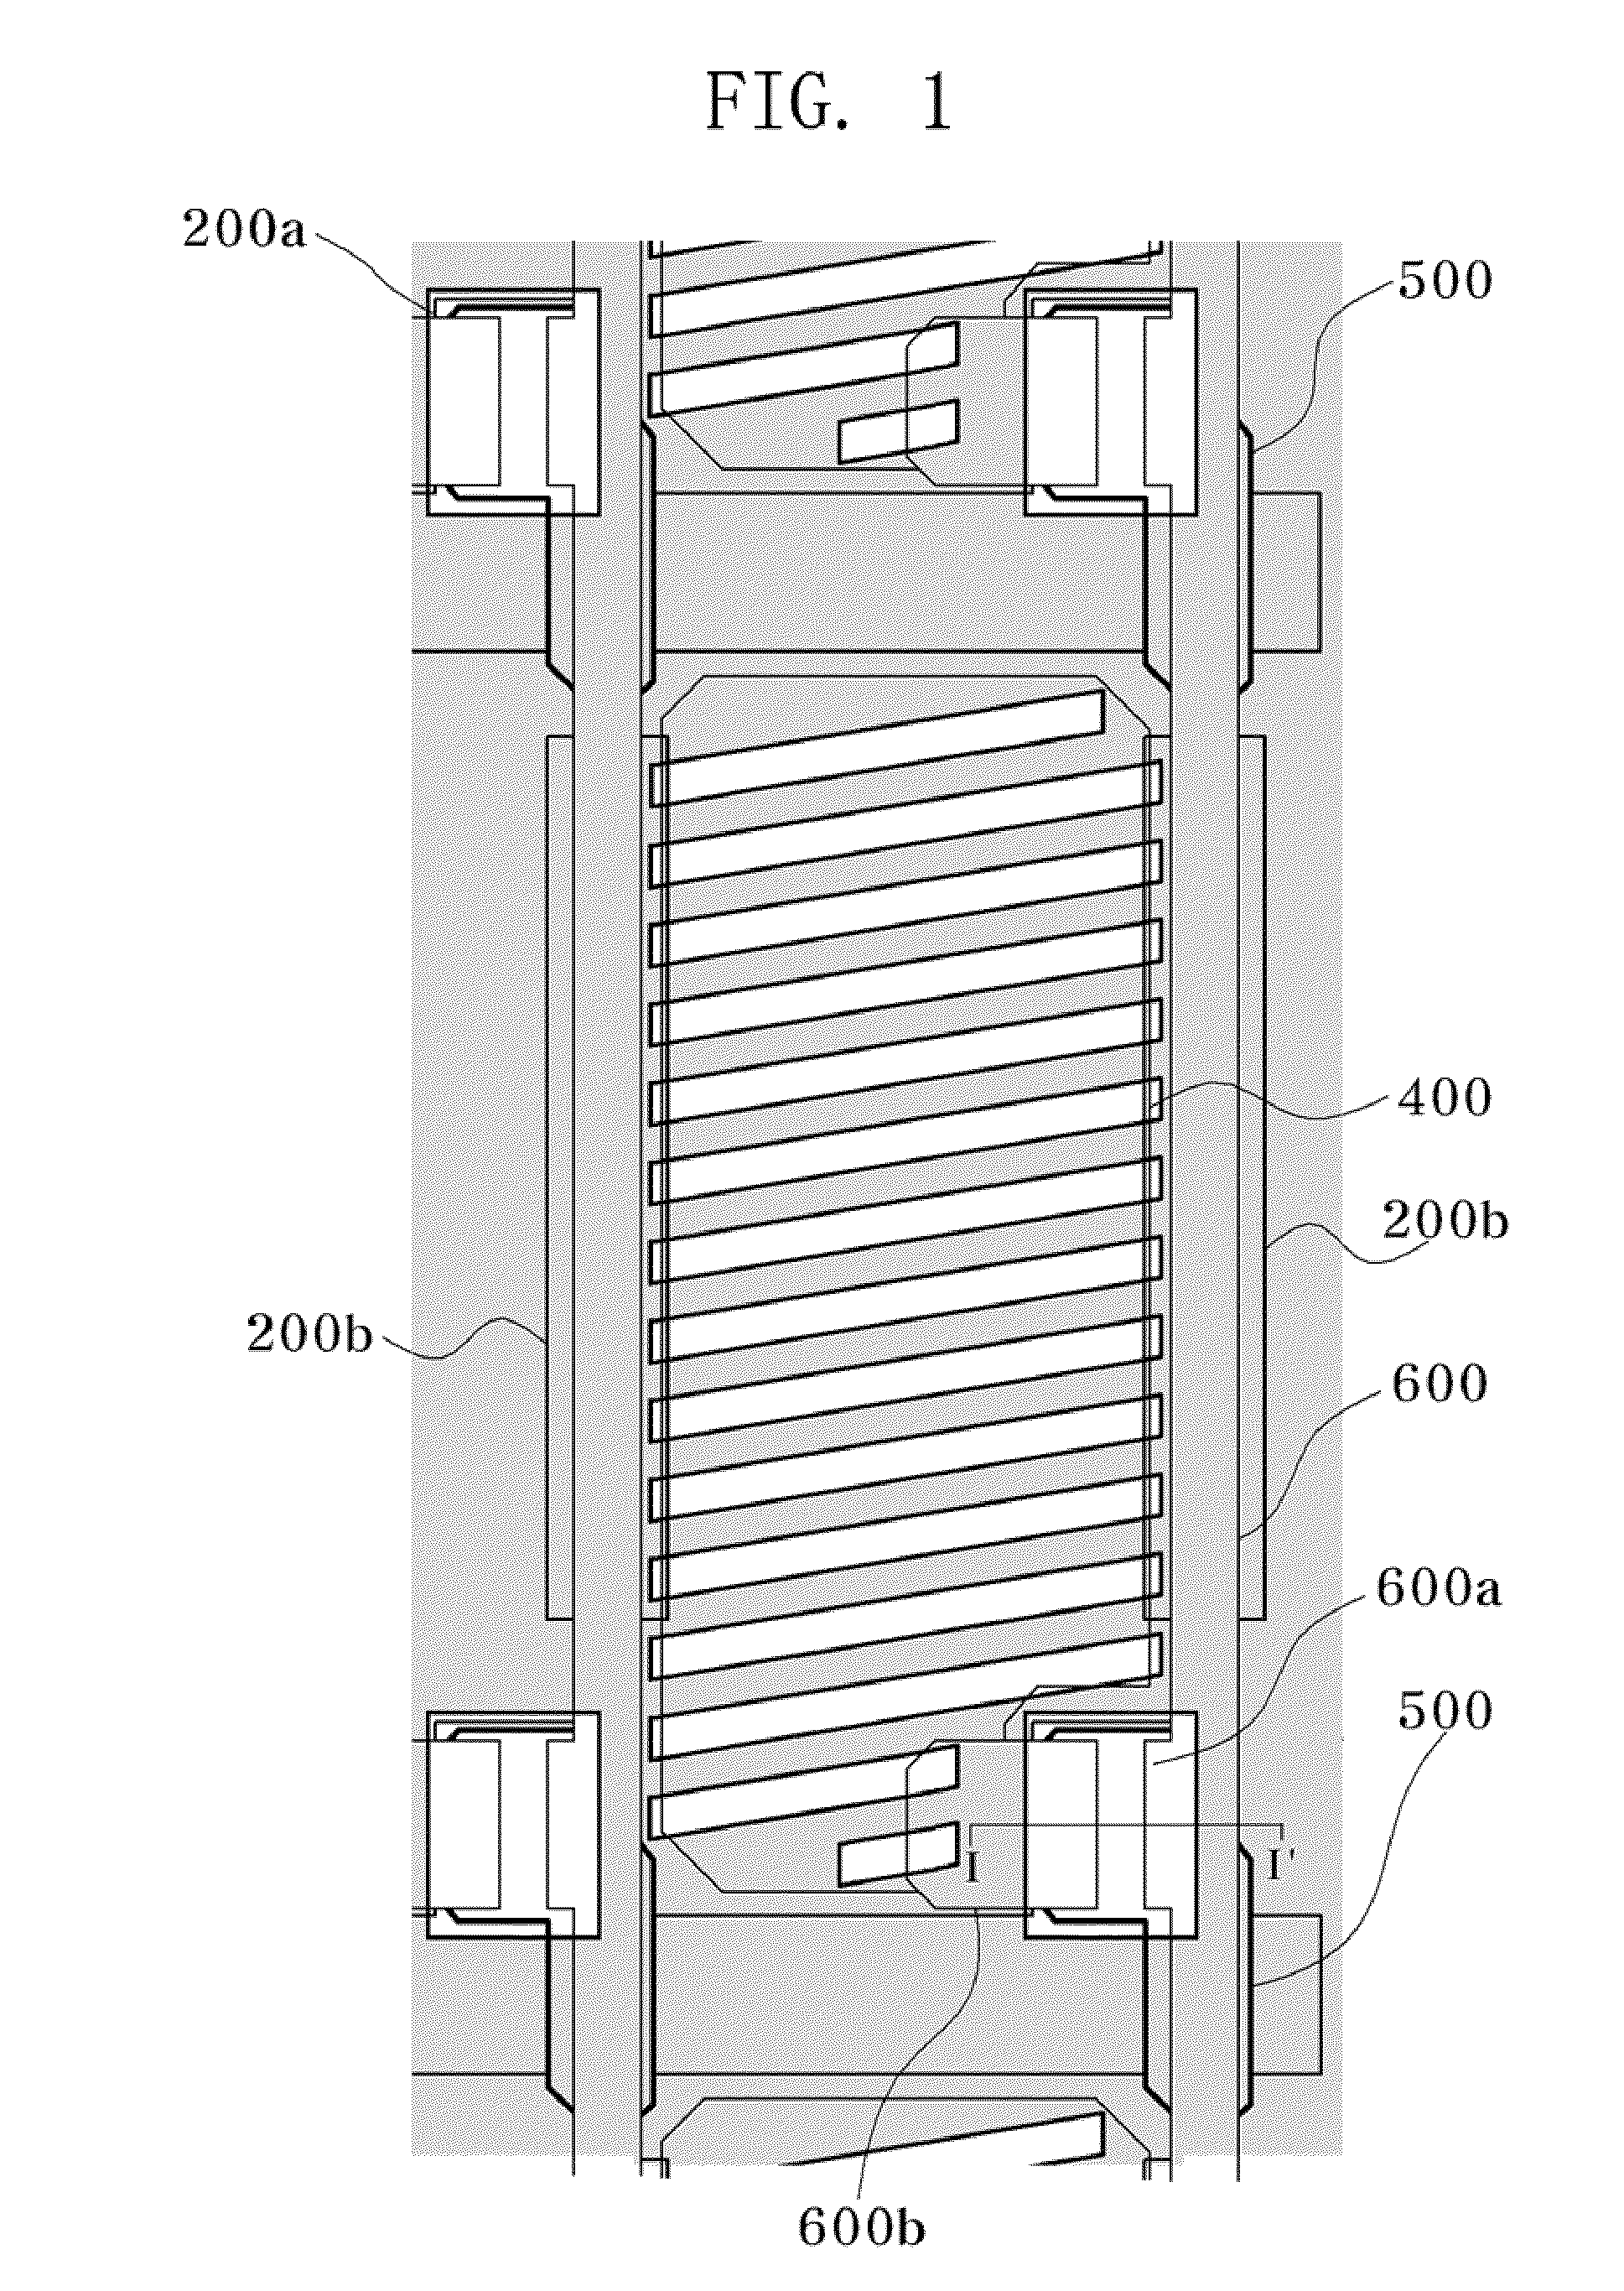 Fringe Field Switching Mode Liquid Crystal Display Device and Method of Fabricating the Same